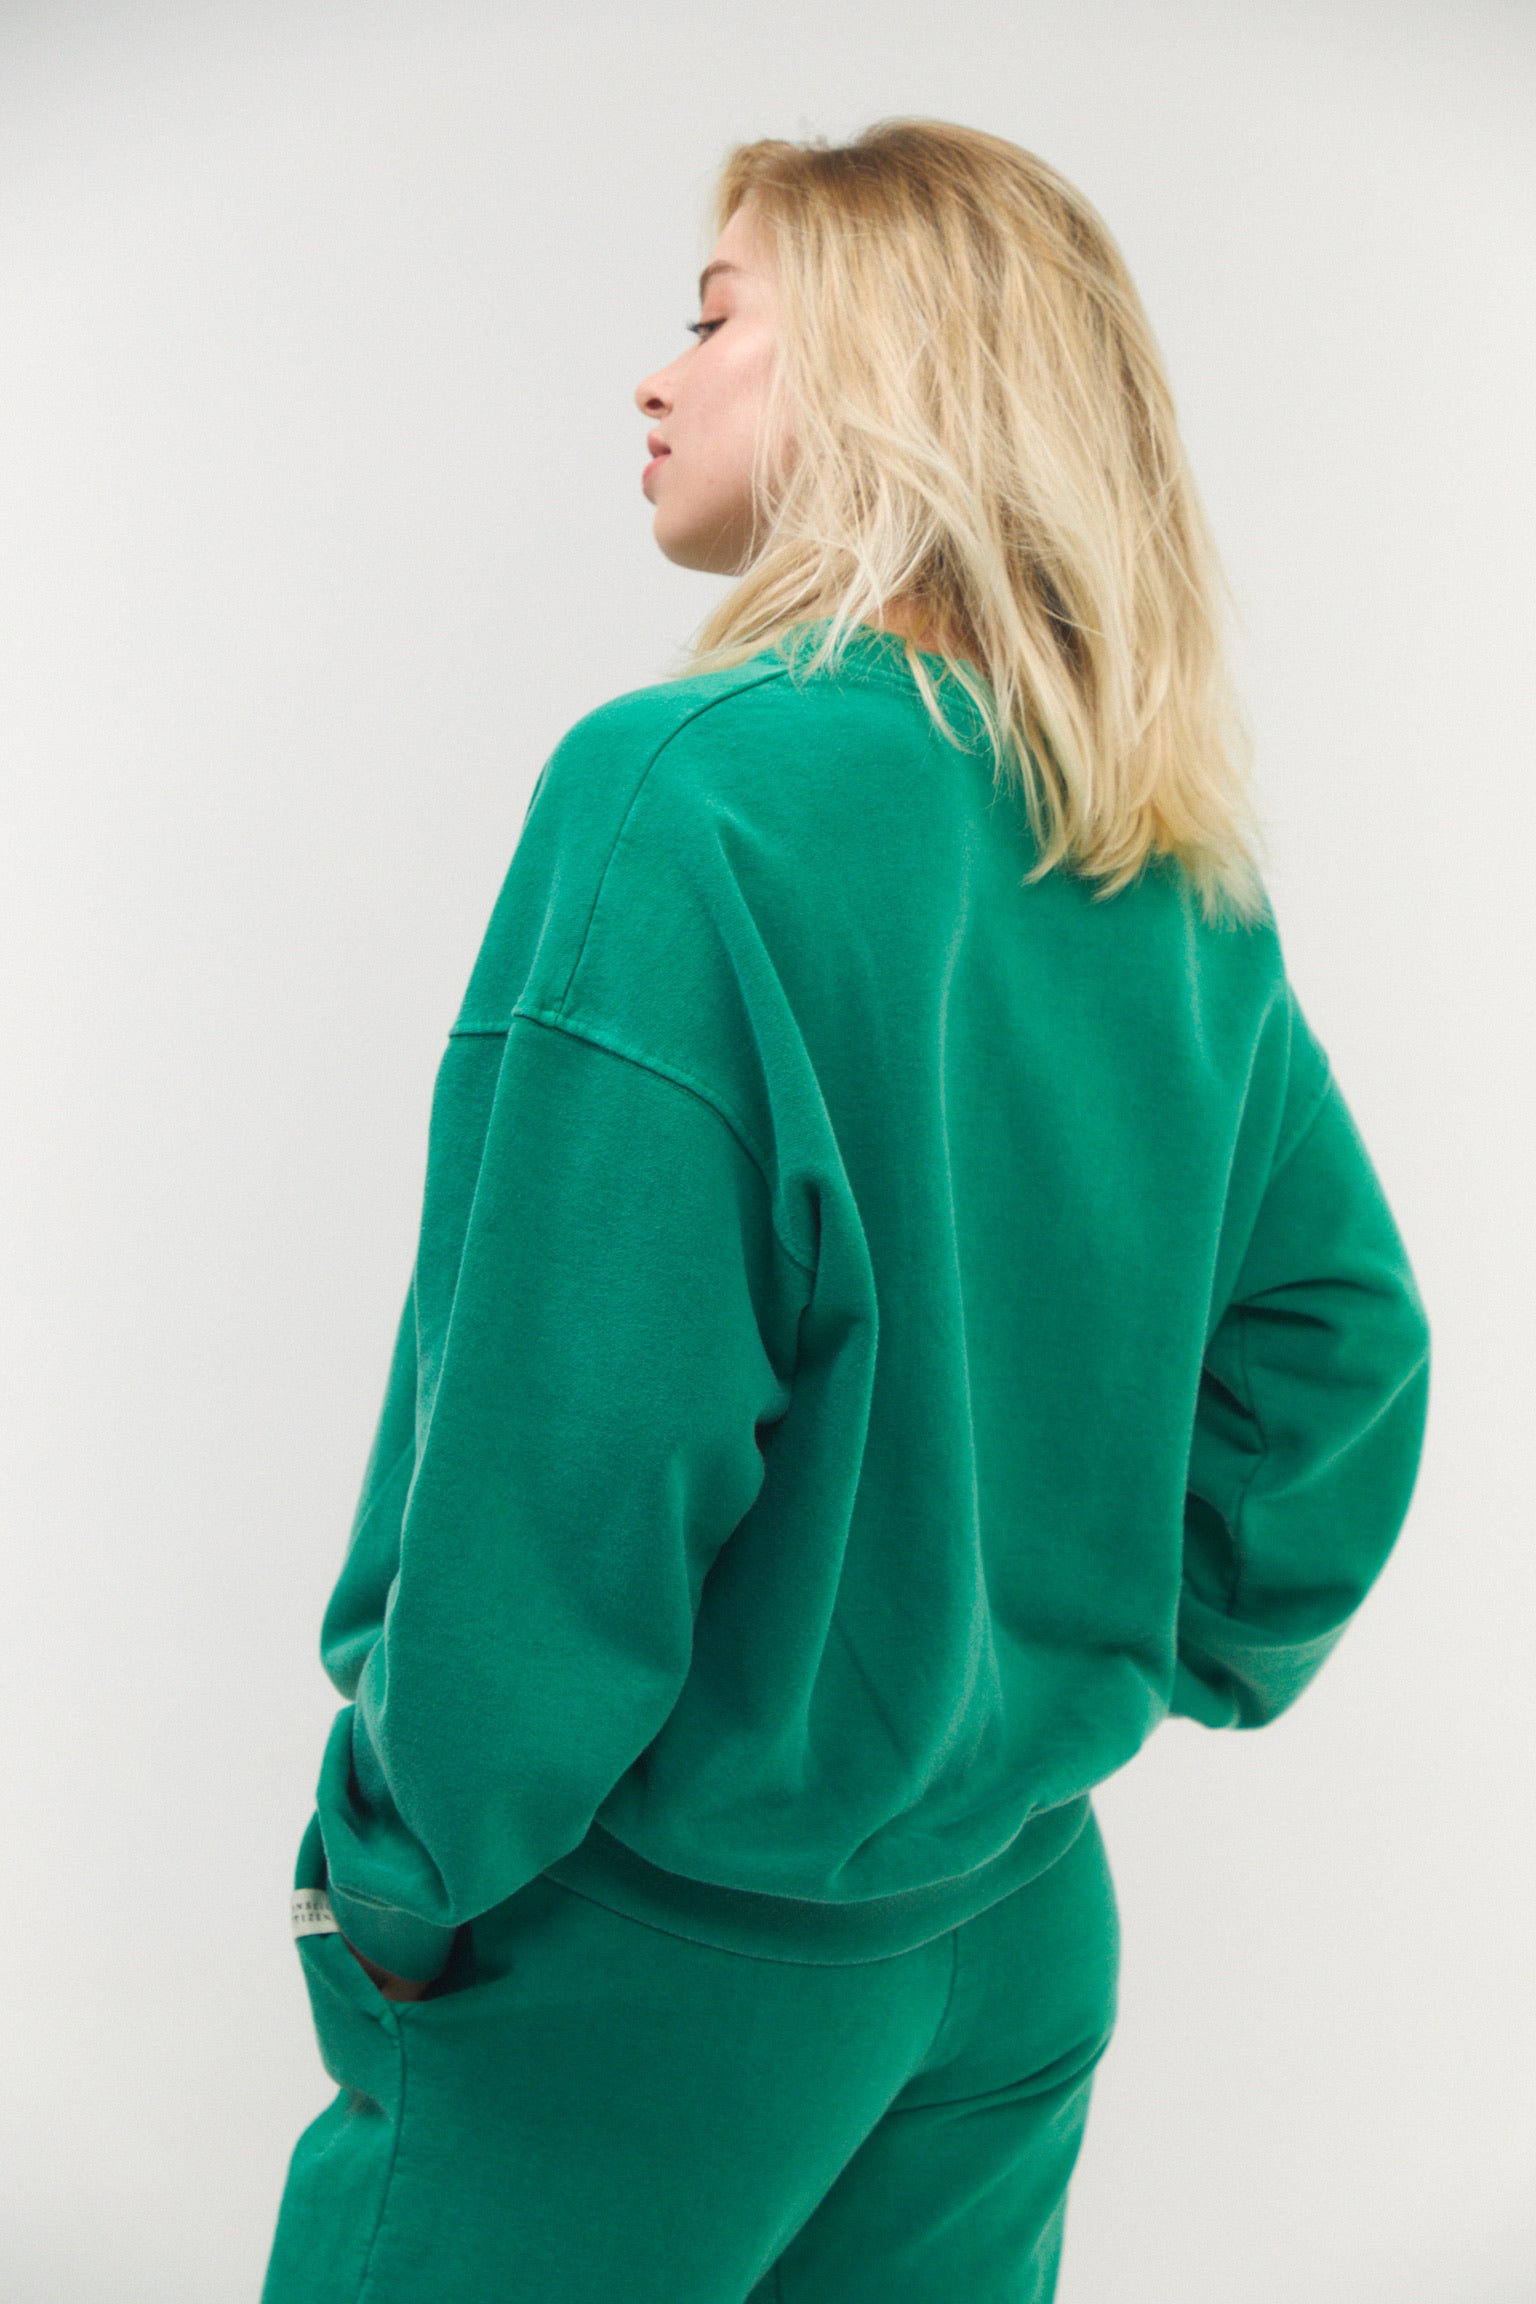  Indulge in the comfort of a soft organic cotton sweatshirt, crafted with care for the planet